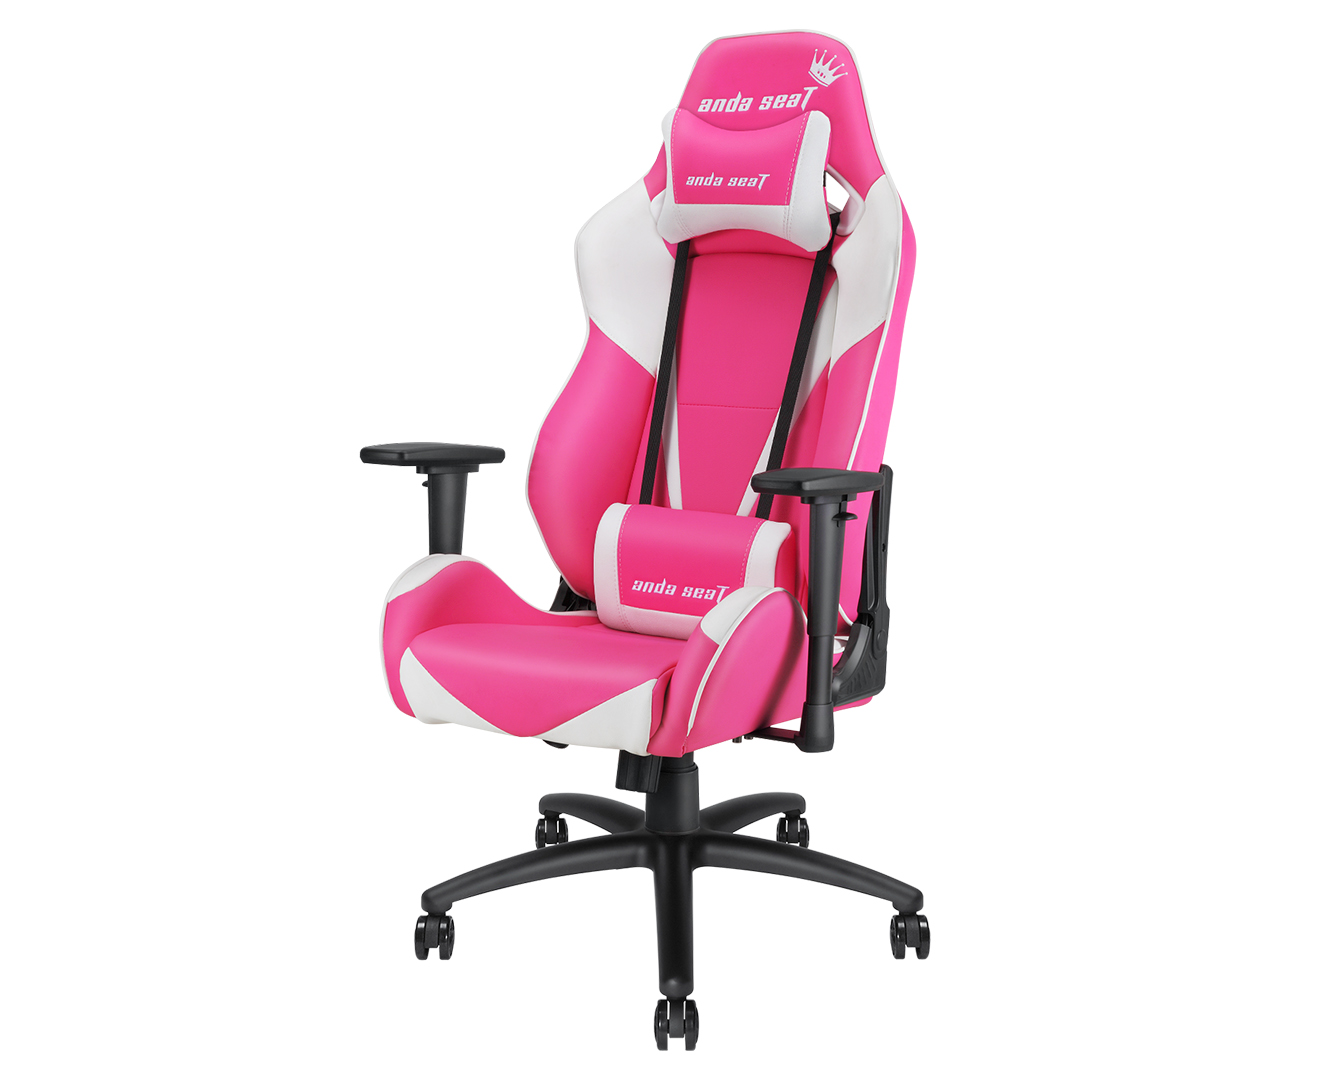 Anda Seat AD7-02 Gaming Chair - Pink/White | Catch.com.au